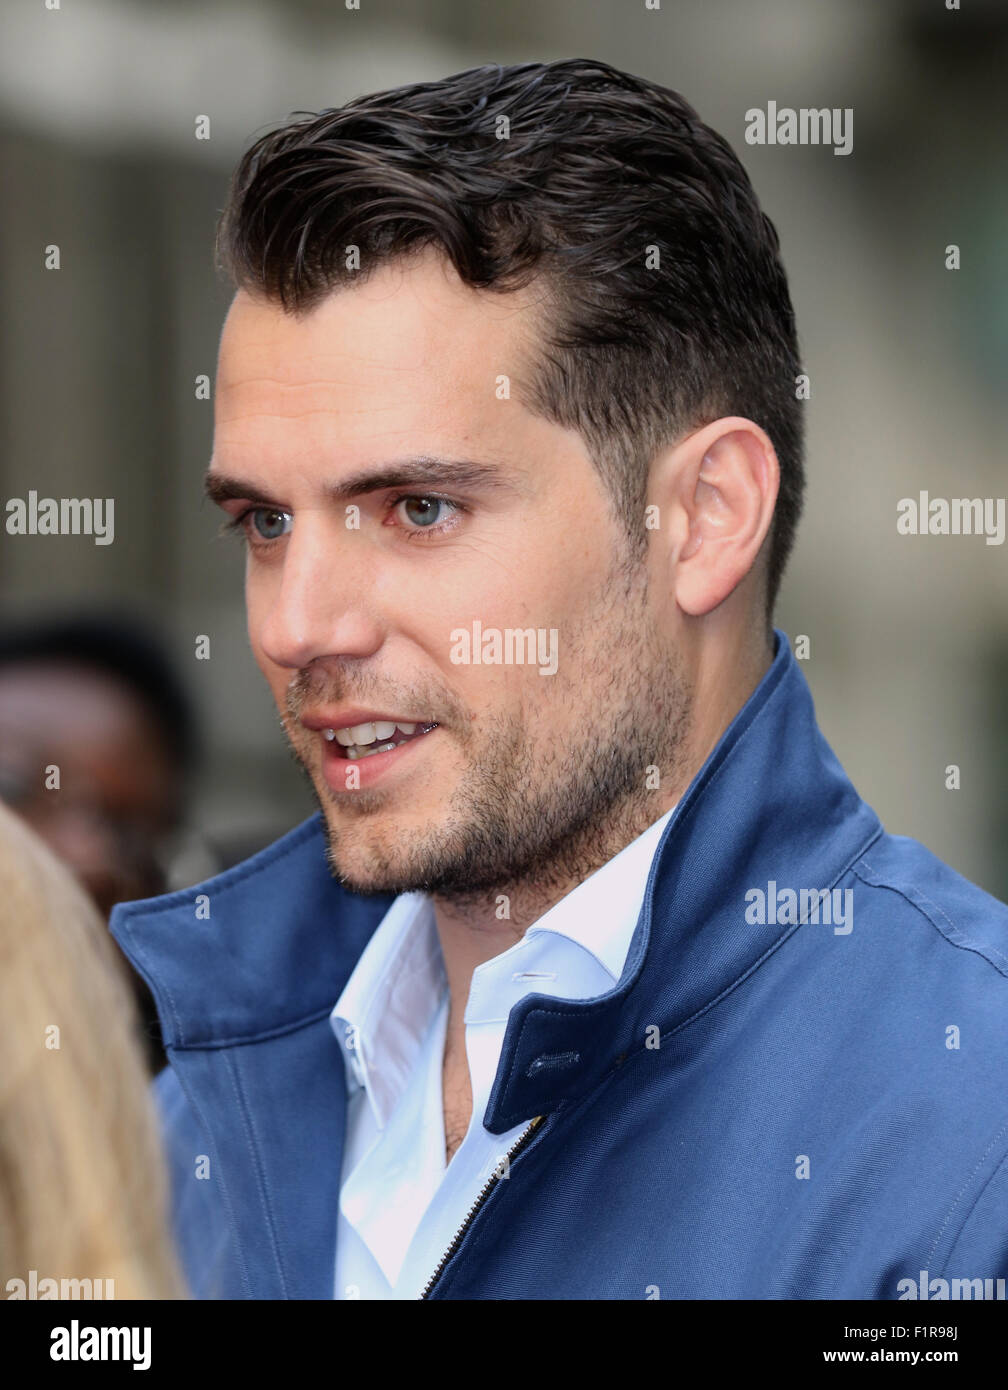 London, UK, 7th Aug 2015: Henry Cavill attends The Man from U.N.C.L.E. - UK film premiere at Somerset House in London Stock Photo